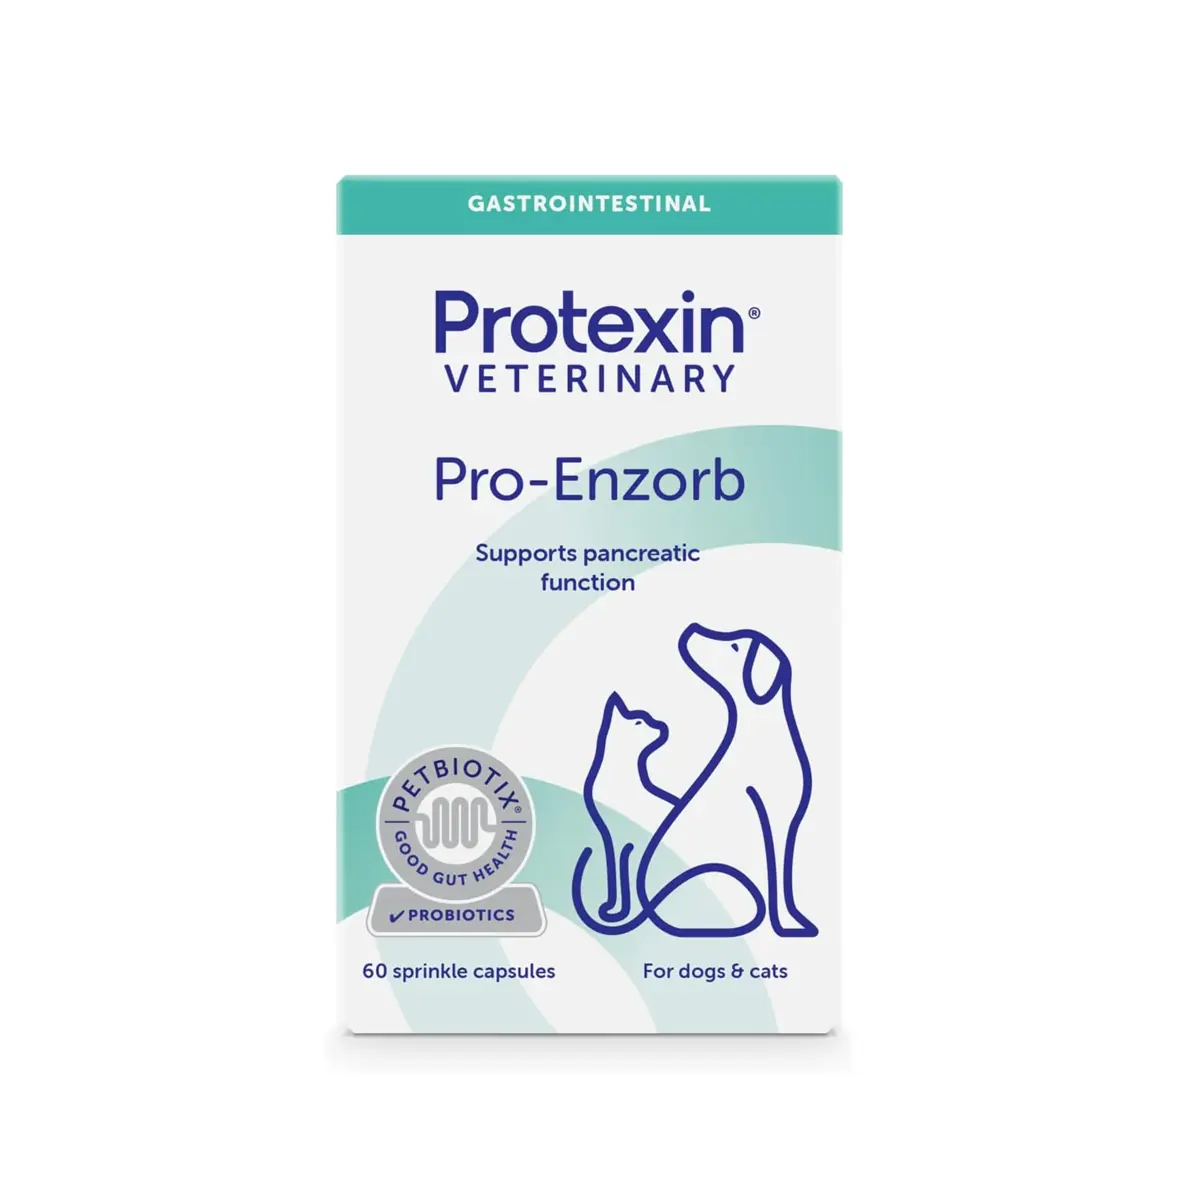 Protexin - PRO-ENZORB (Pancreatic Supplement for Dogs & Cats) 60 Capsules